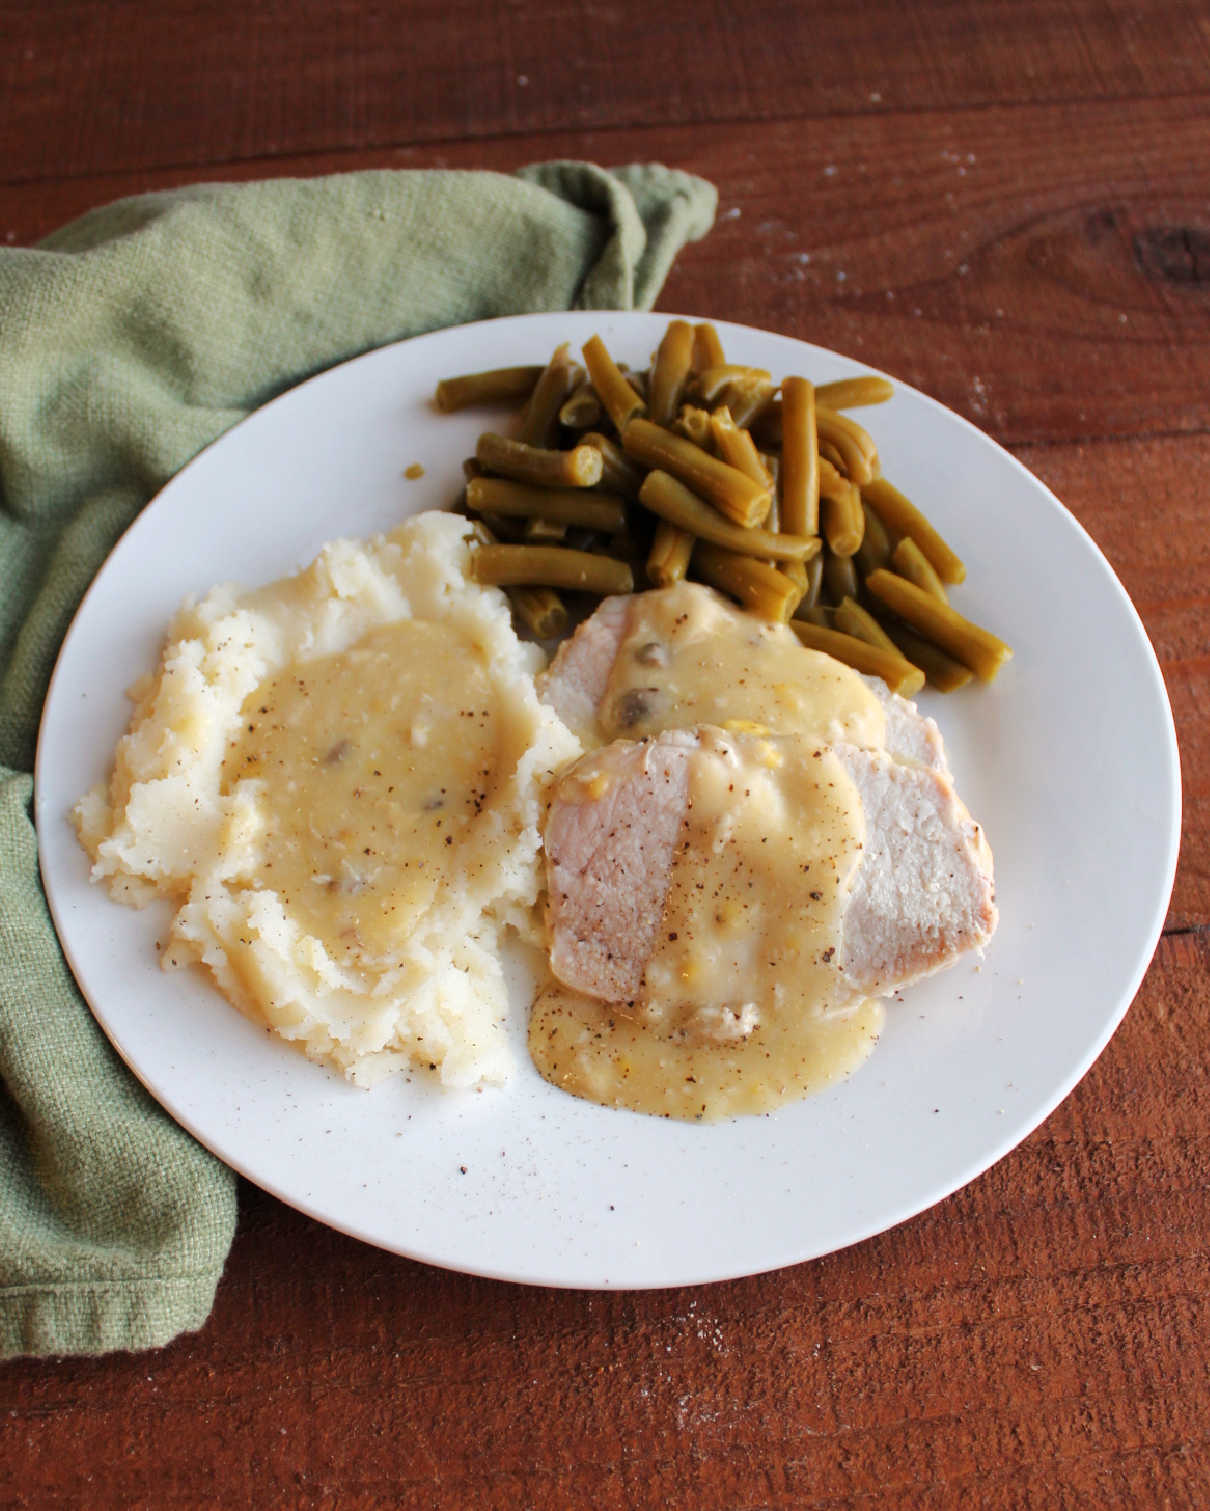 Slow cooker pork loin slices served with creamy gravy, mashed potatoes and gravy and green beans ready to eat.